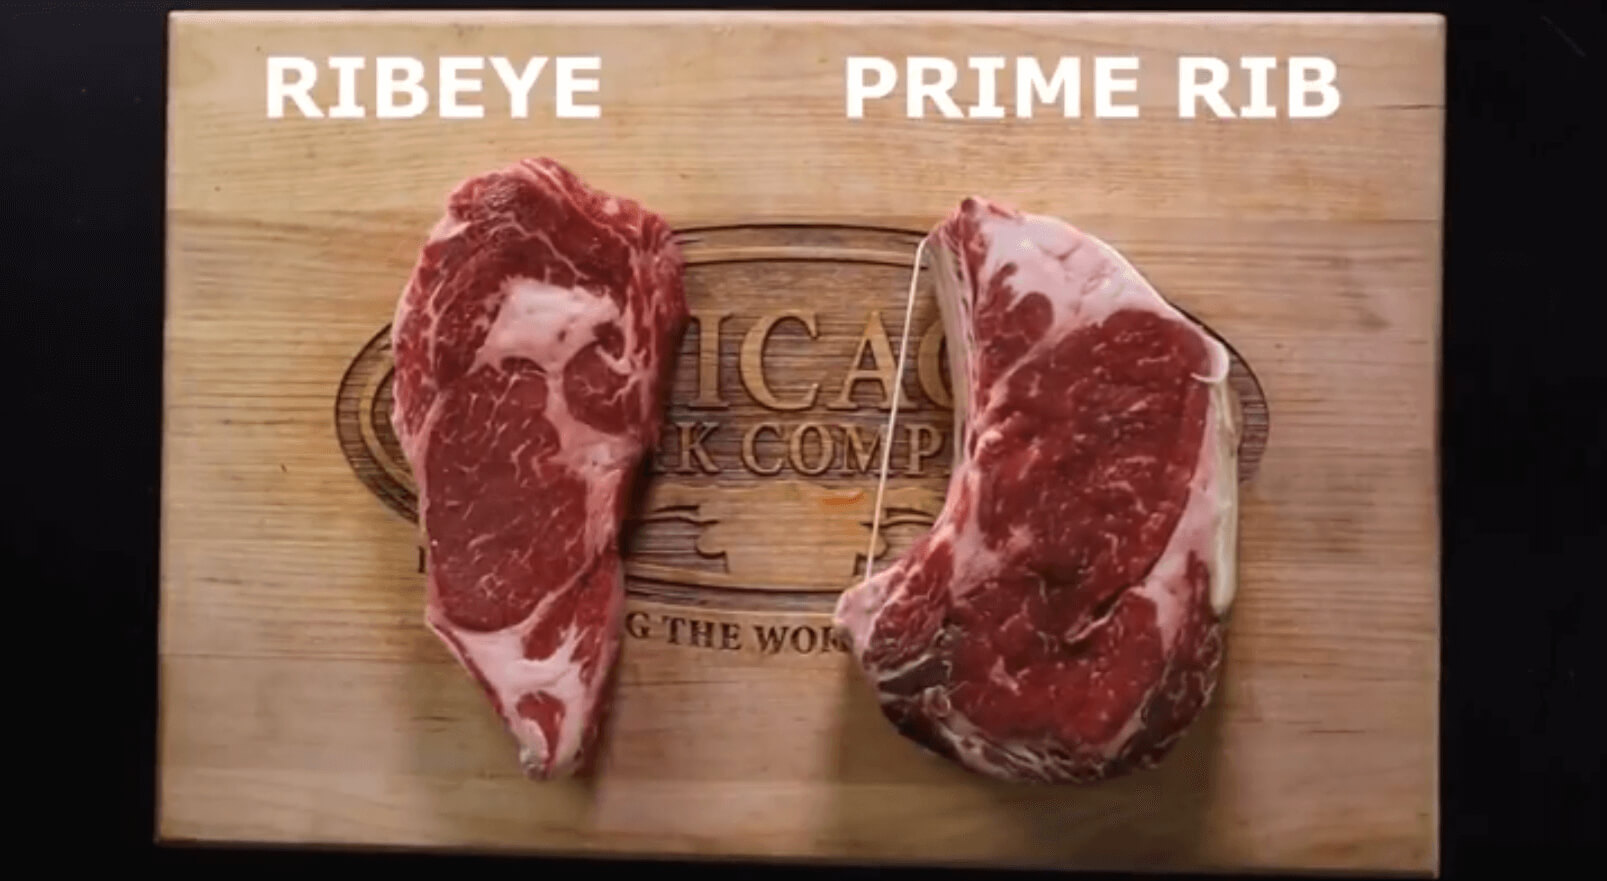 what does prime beef mean and where does prime rib come from